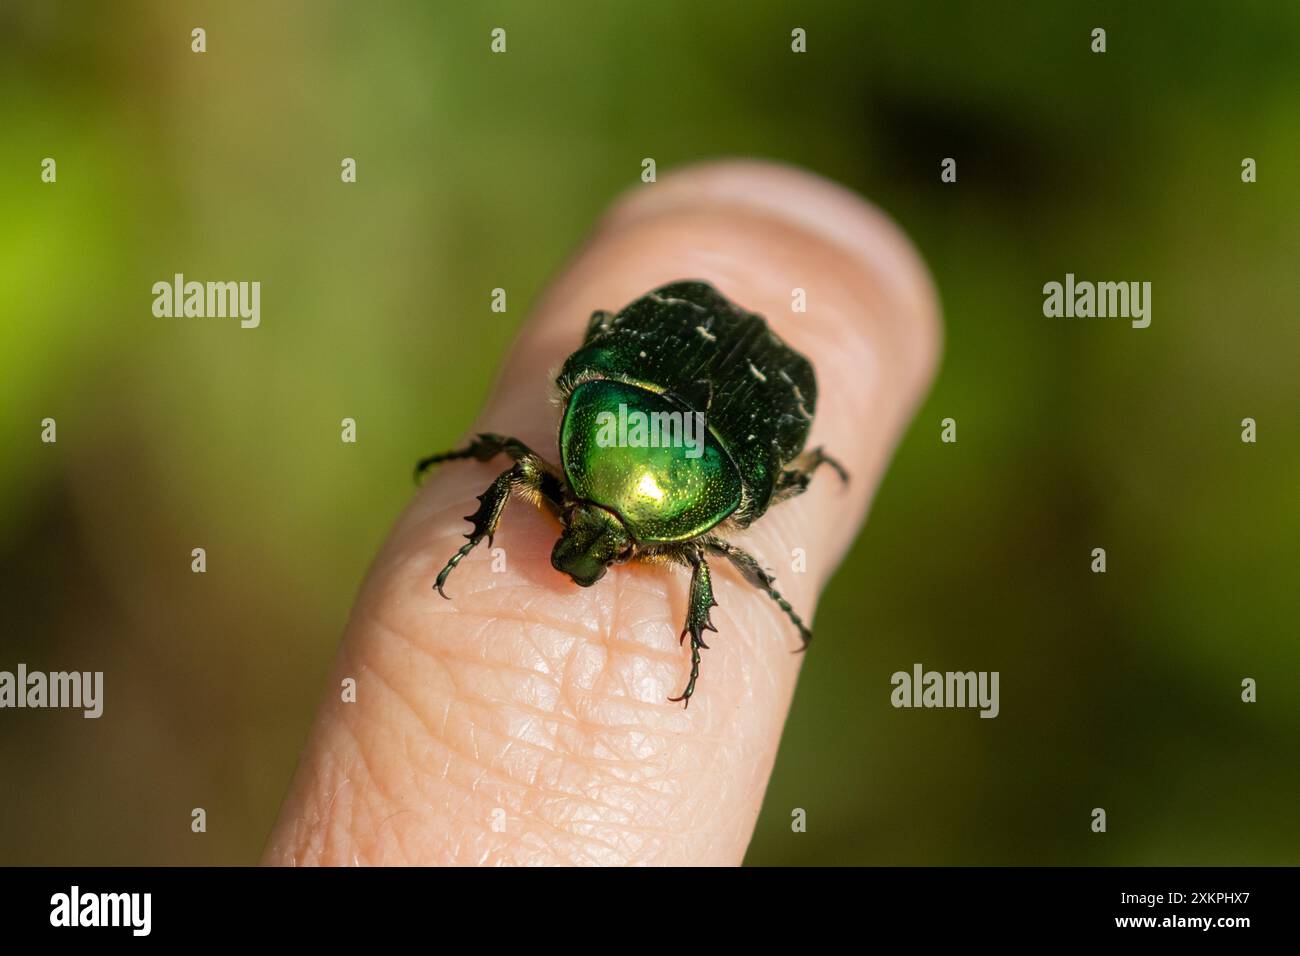 Rose chafer beetle, Cetonia aurata resting on a persons finger. UK Stock Photo